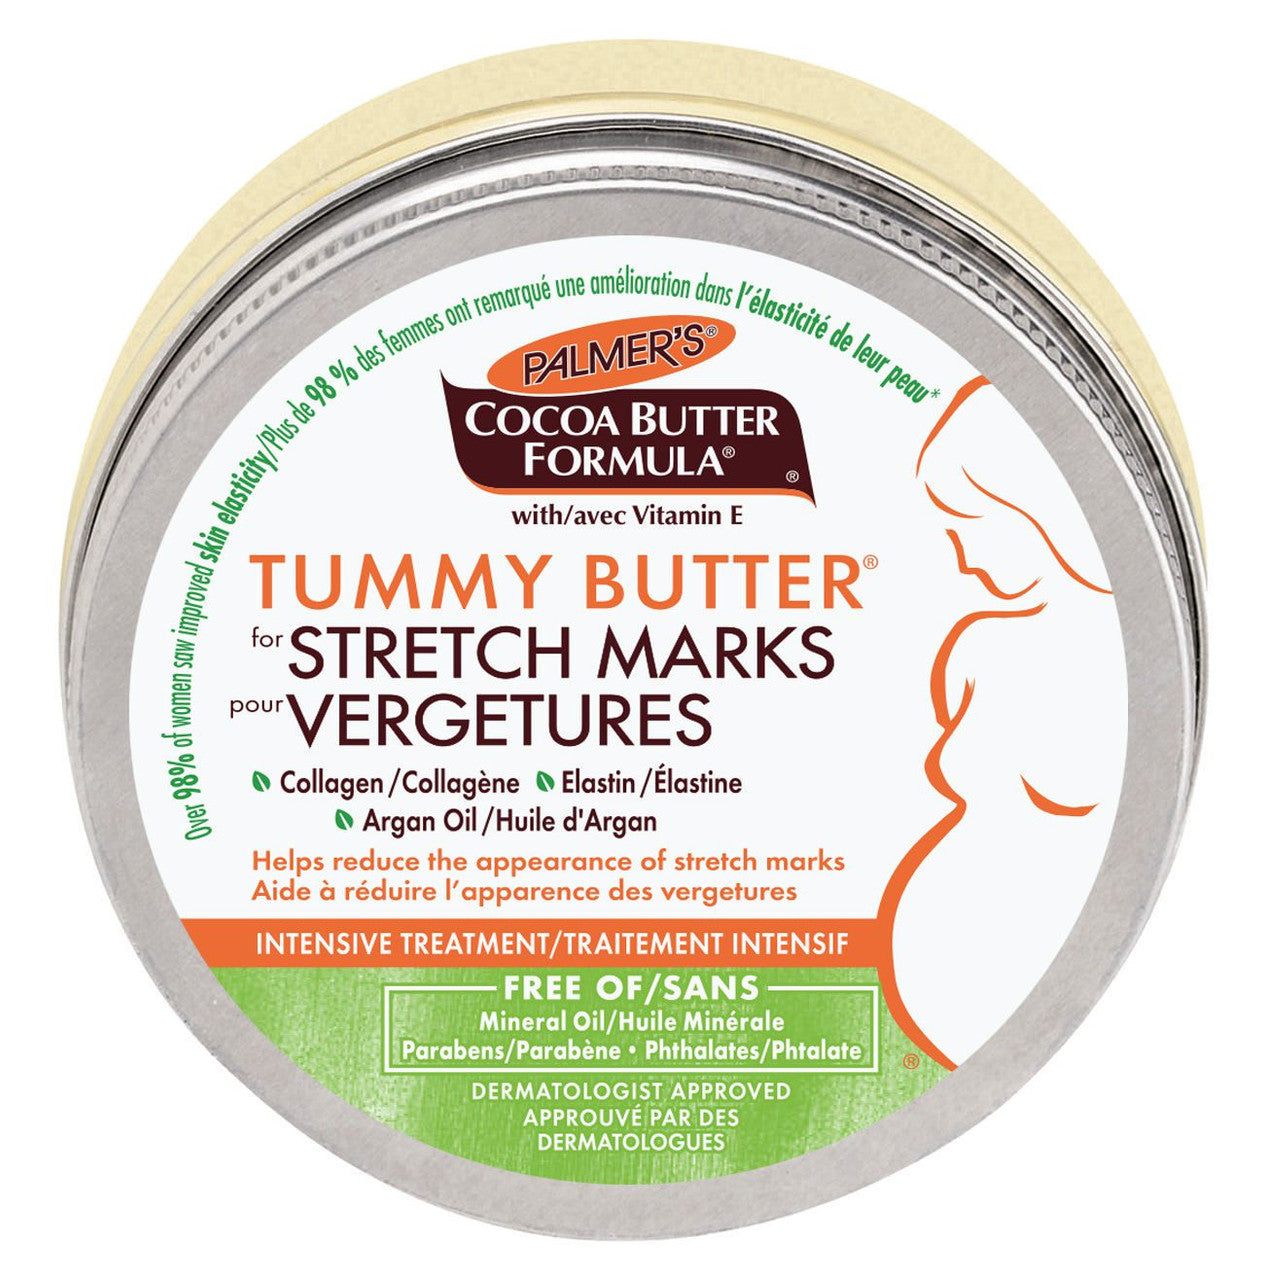 Palmer's Cocoa Butter Formula Tummy Butter Balm for Stretch Marks and Pregnancy Skin Care, 4.4 oz.